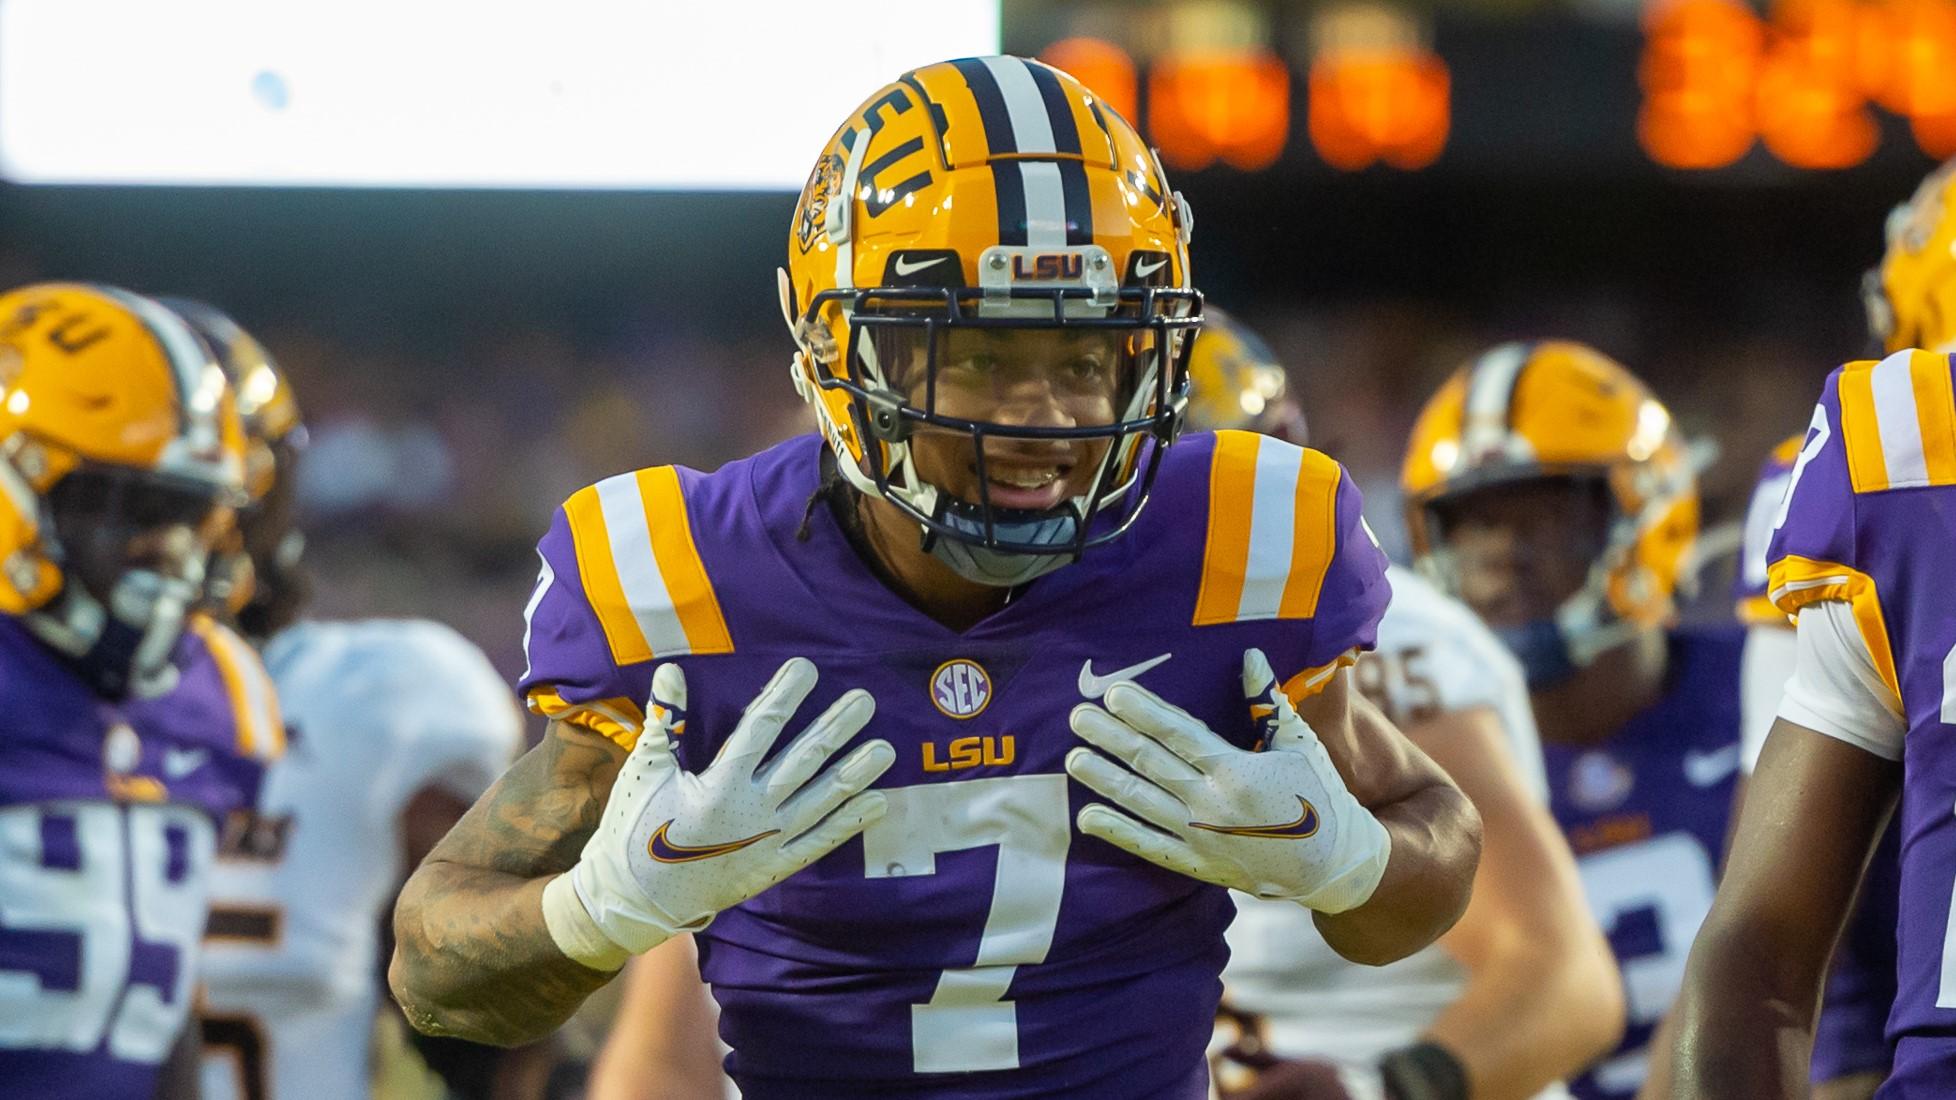 LSU Tigers cornerback Derek Stingley Jr. (7) reacts after making a tackle against the Central Michigan Chippewas at Tiger Stadium. / Scott Clause/USA TODAY